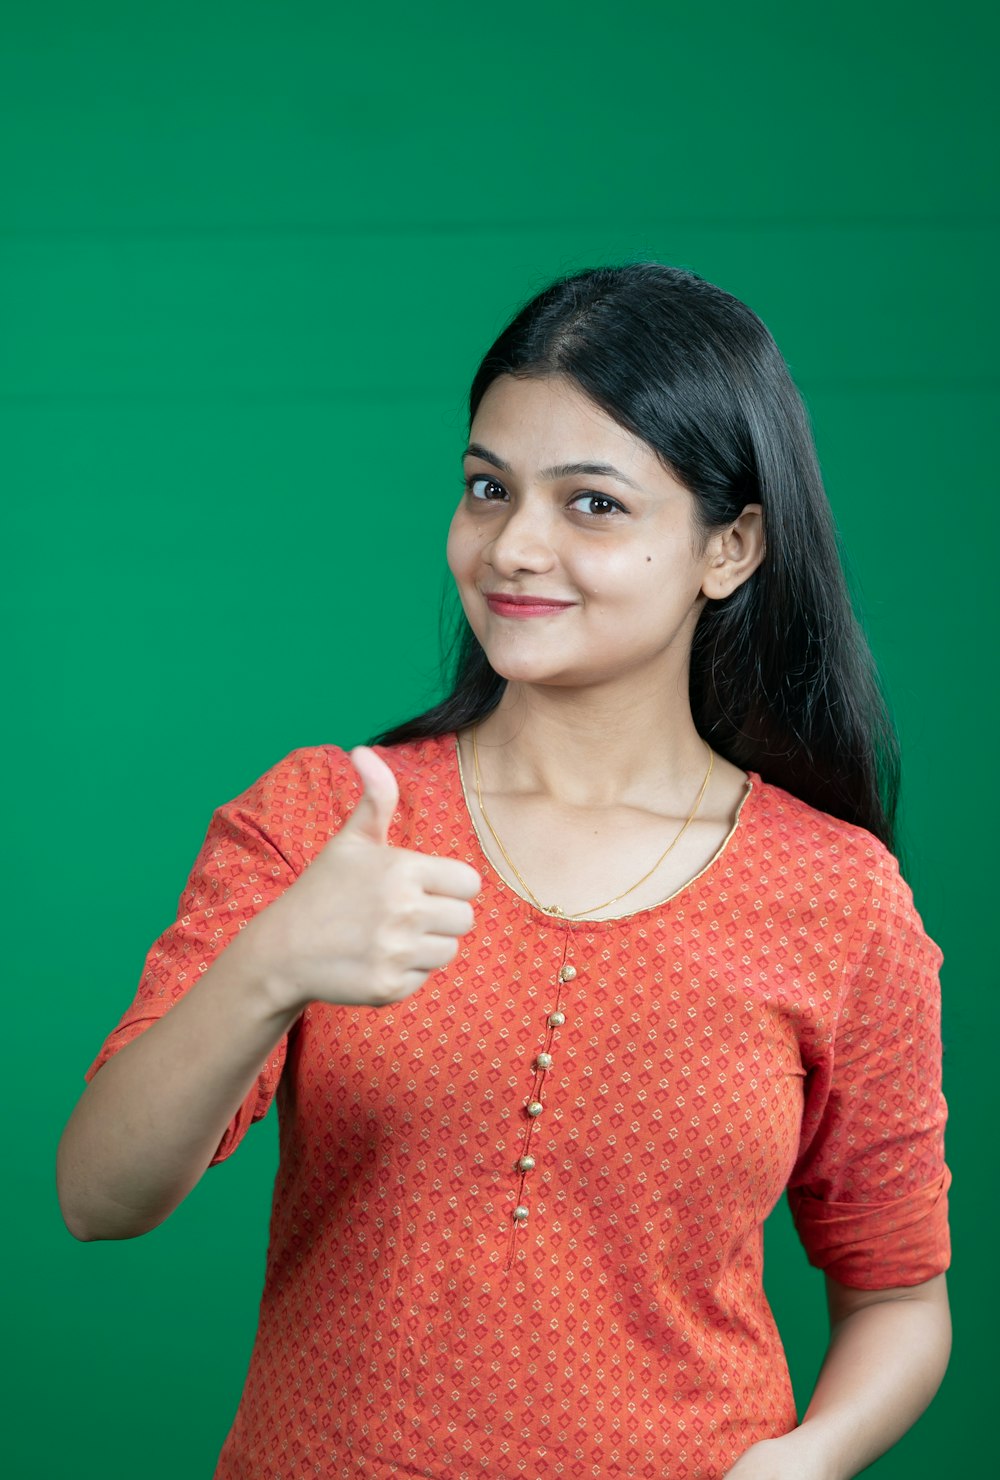 a woman giving a thumbs up sign